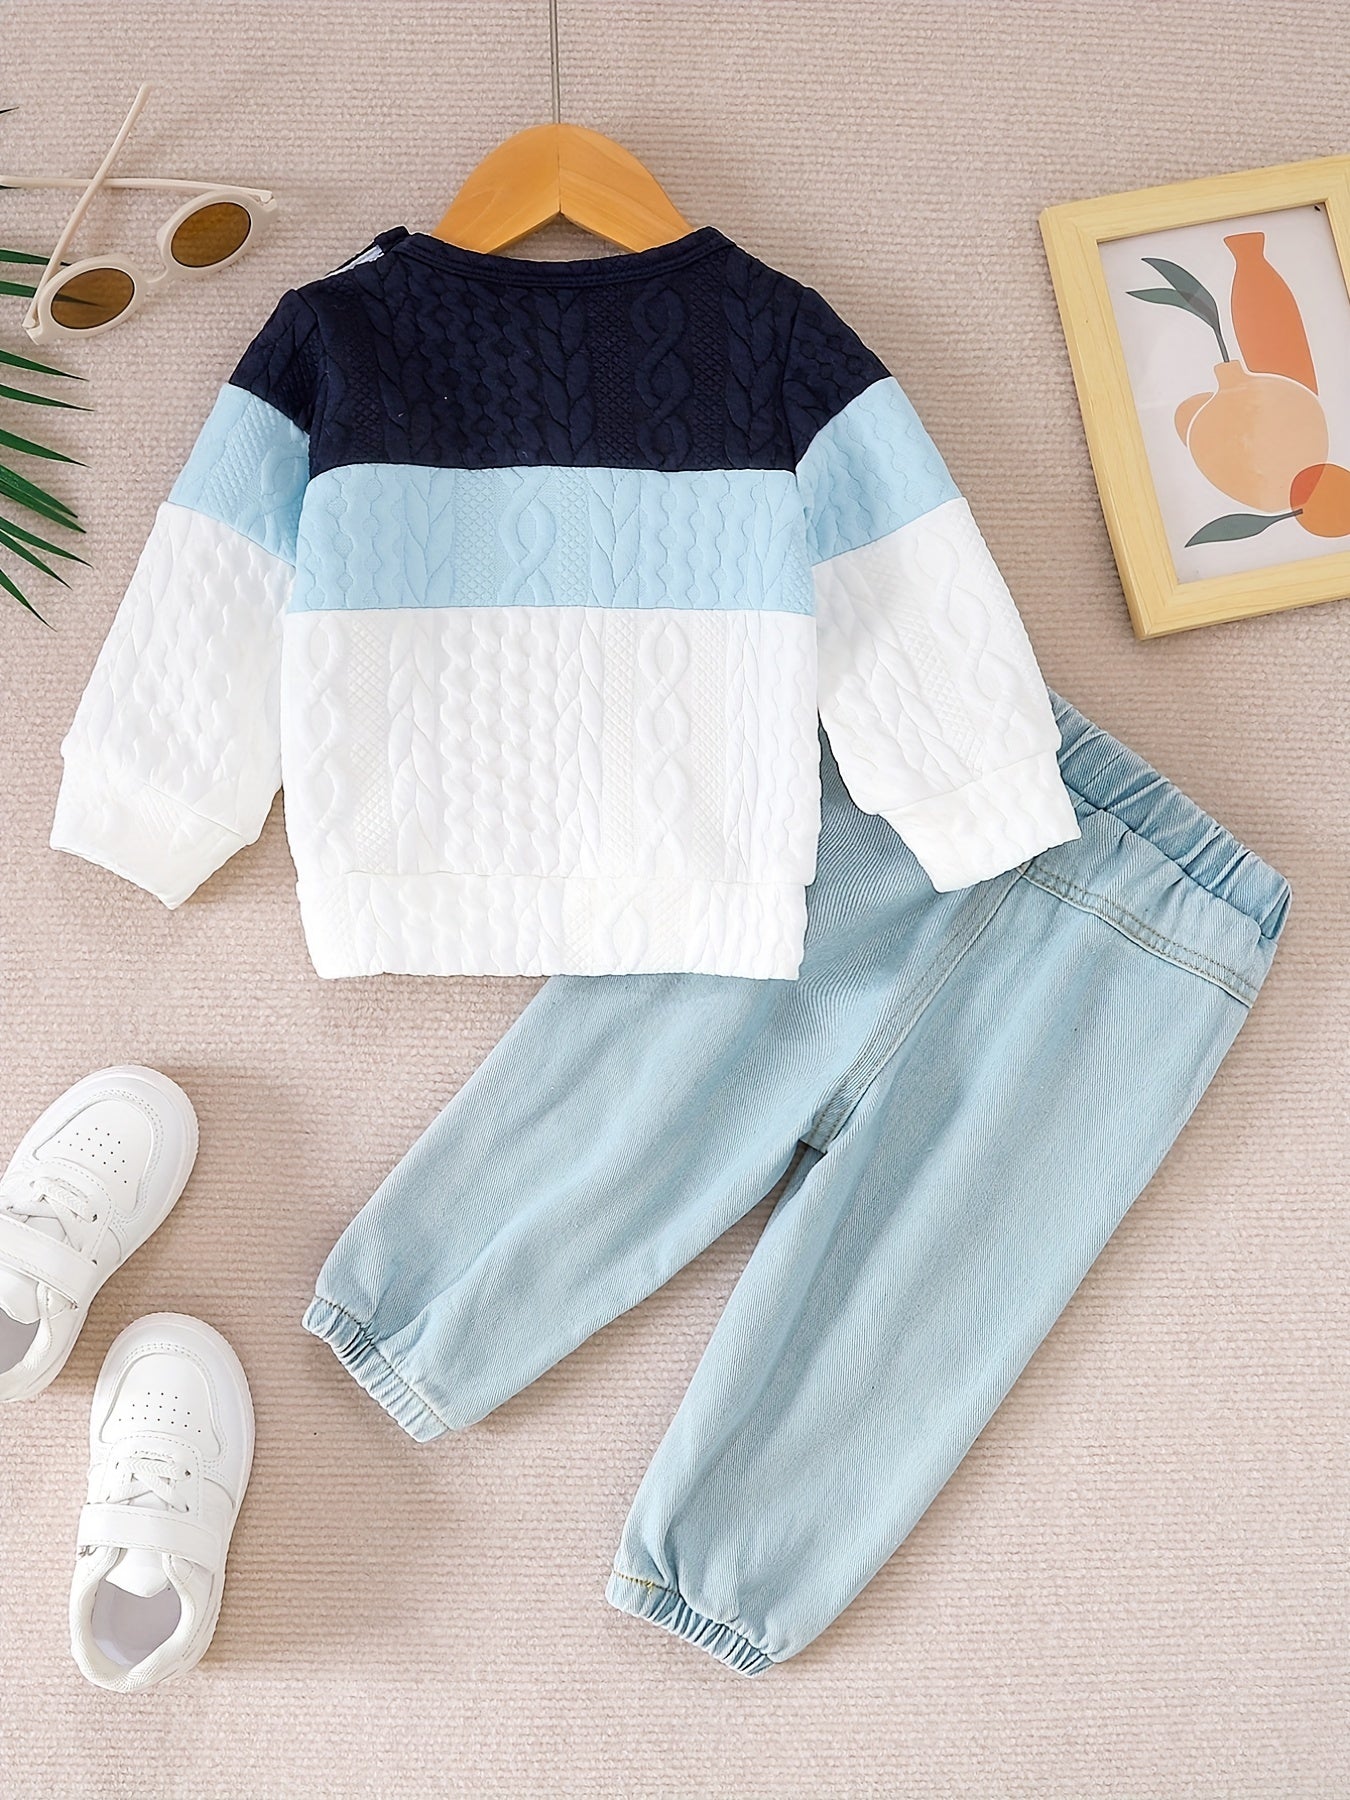 Toddler Baby Boys Stylish Outfit - Long Sleeve Stitching Pullover + Ripped Jeans Set